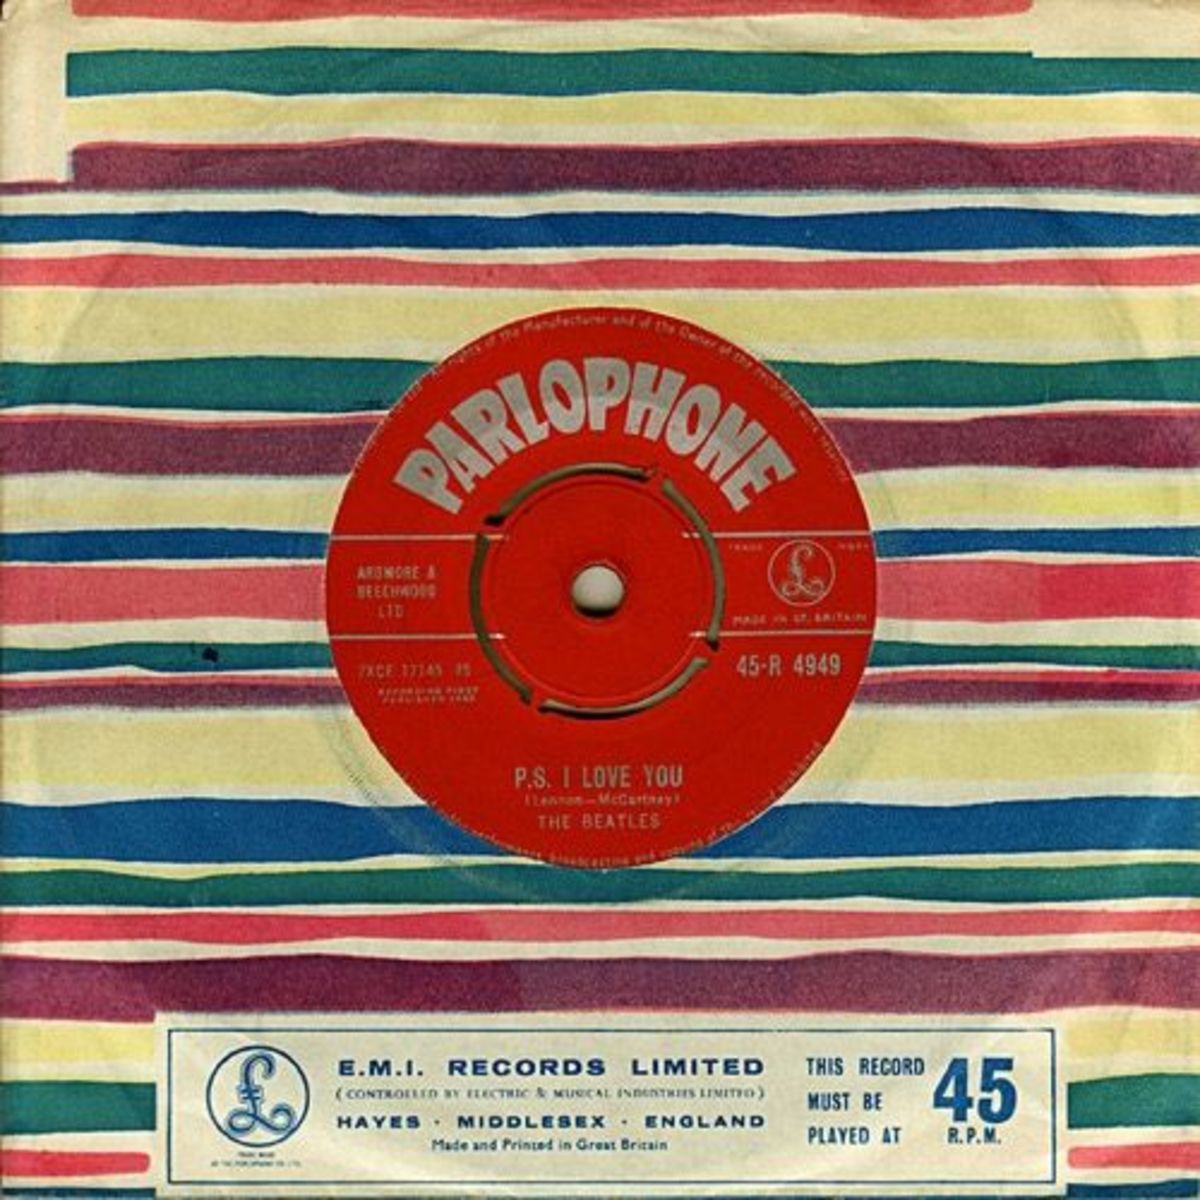 The Beatles Love Me Do b/w P.S. I Love You Parlophone Records 45 R 4949 7 in. Vinyl Record Beach stripe Company sleeve colored wavy lines with Parlophone logo in a box on front